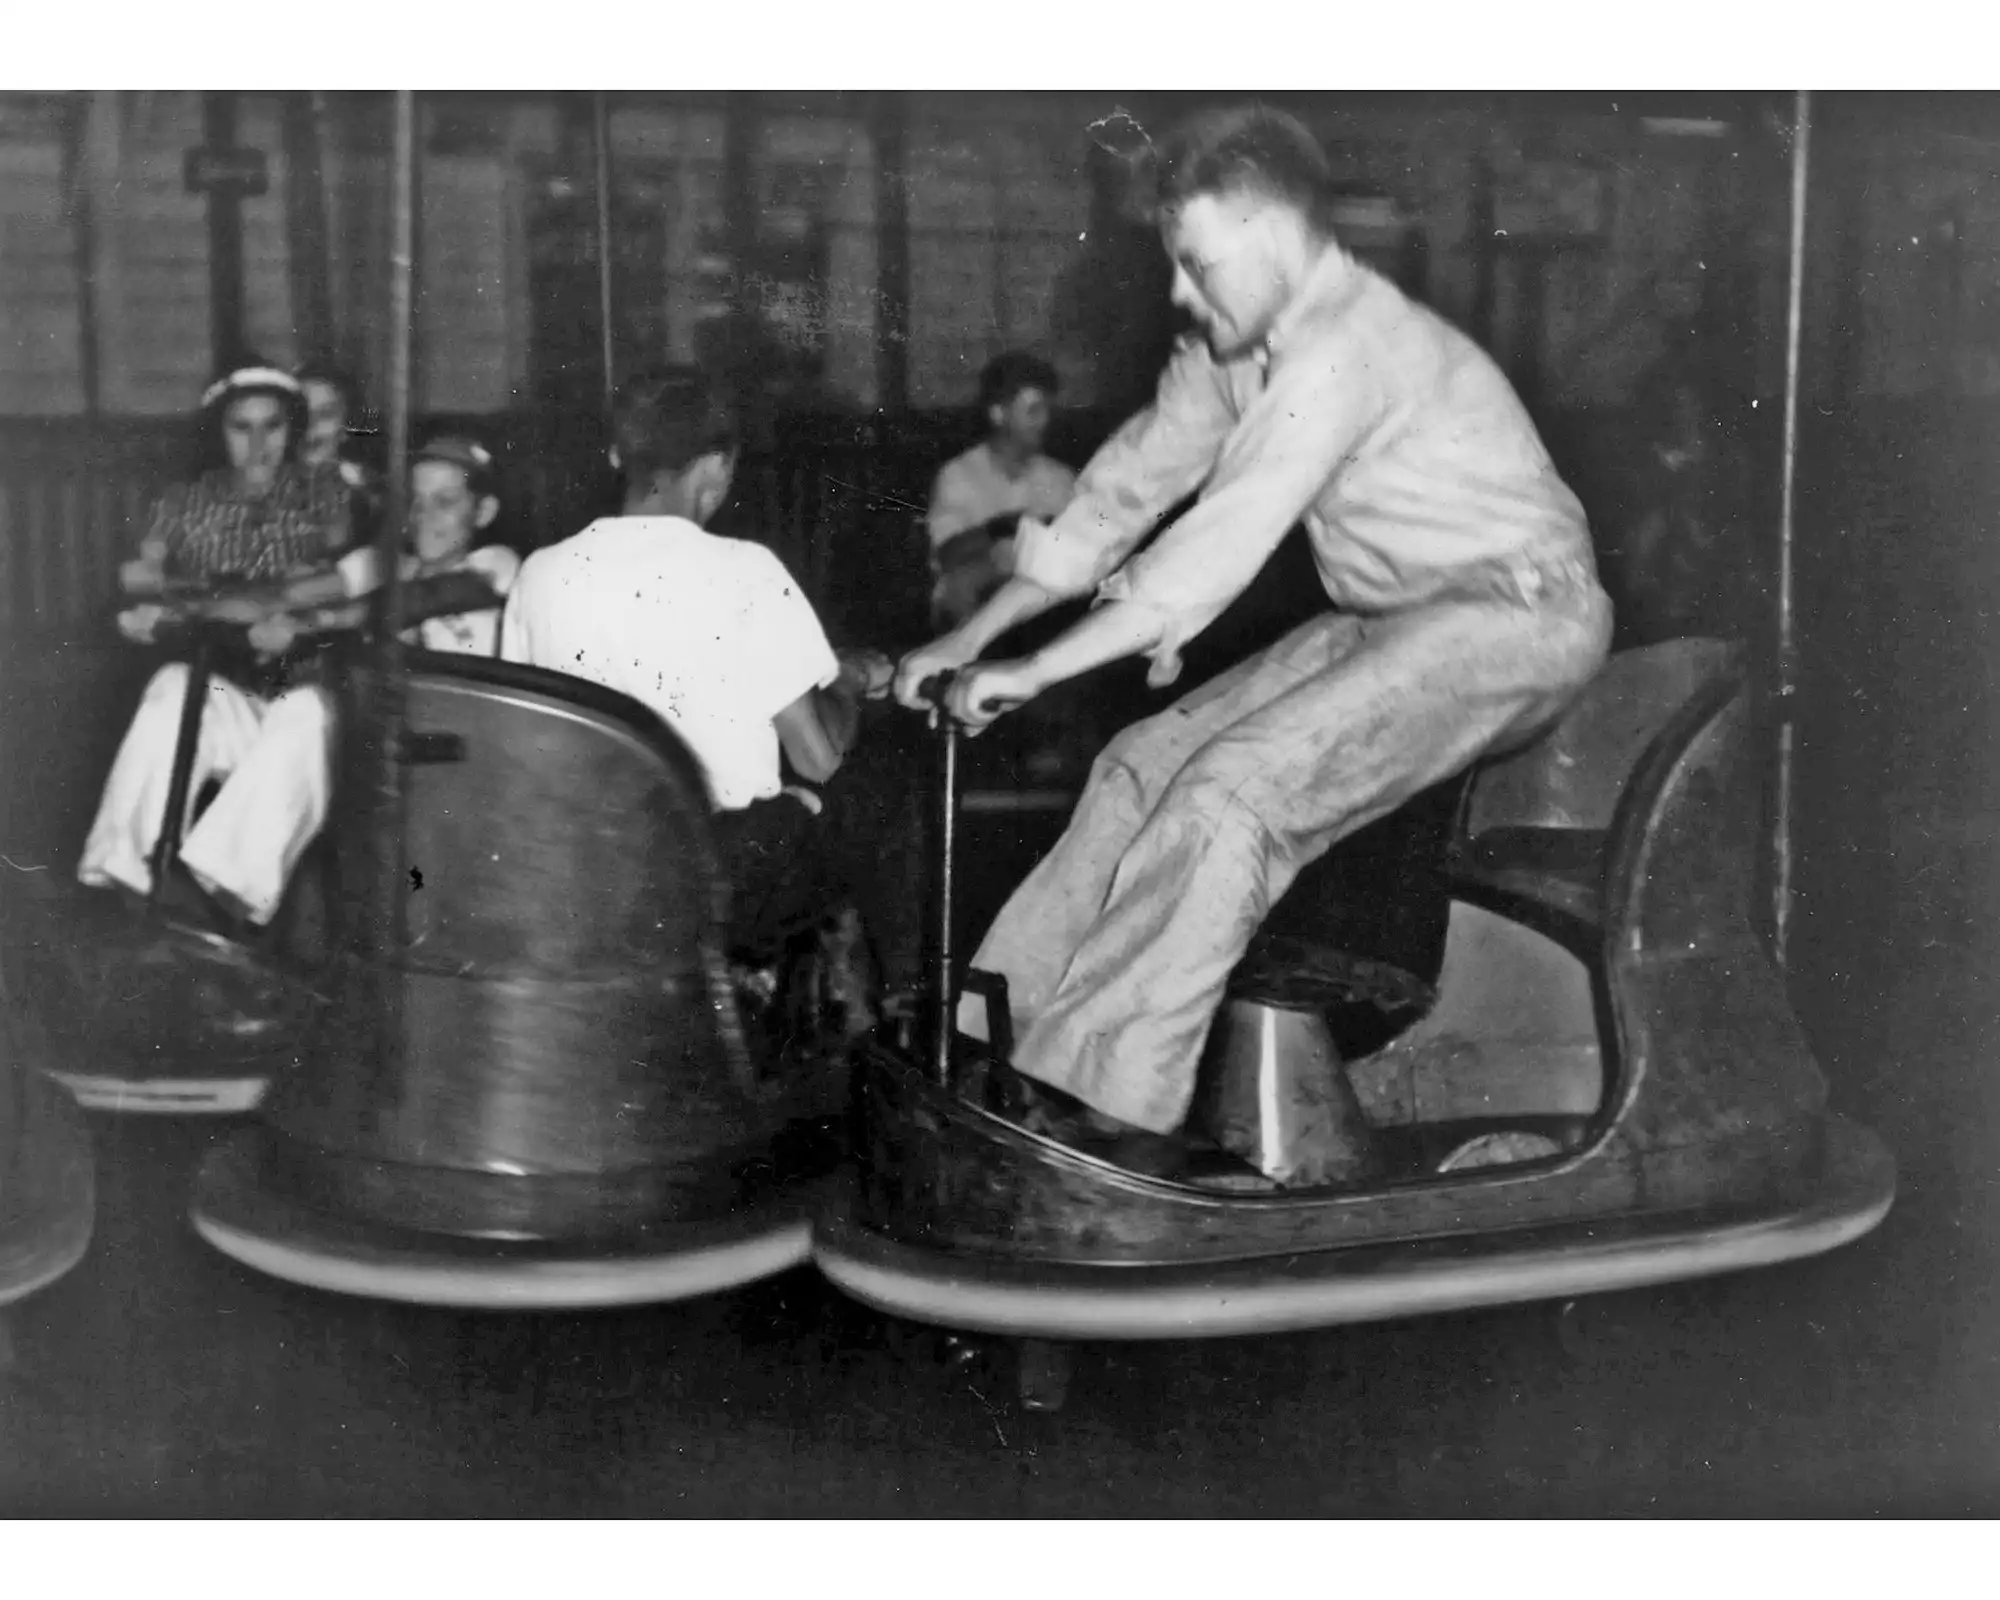 historic photo of bumper cars from the Silver Beach Amusement Park